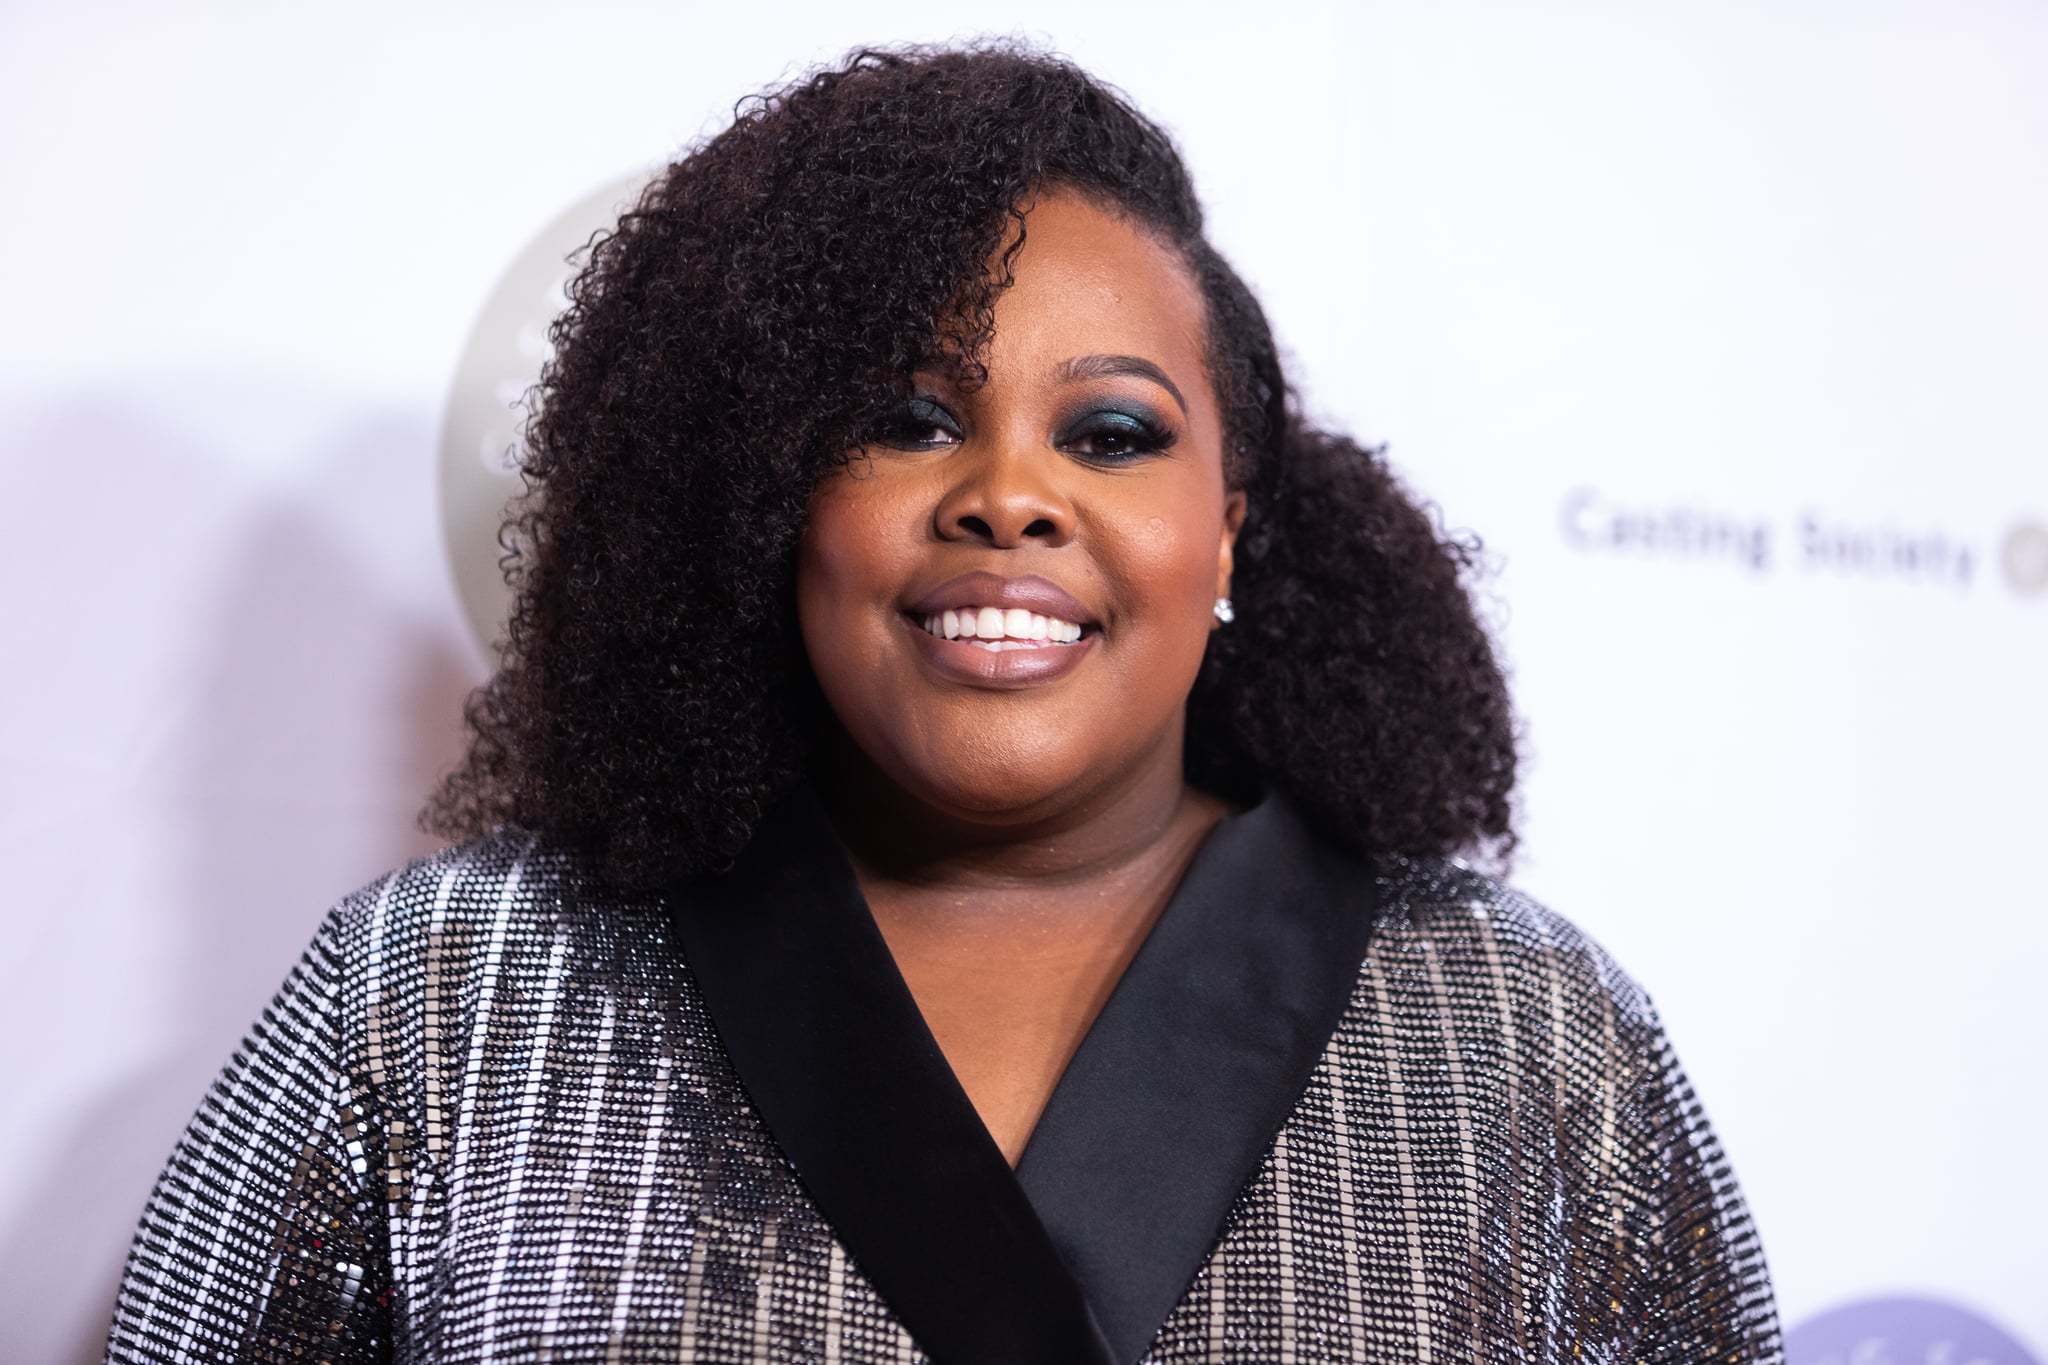 BEVERLY HILLS, CALIFORNIA - JANUARY 31:  Amber Riley attends The Casting Society of America's 34th Annual Artios Awards at The Beverly Hilton Hotel on January 31, 2019 in Beverly Hills, California. (Photo by John Wolfsohn/Getty Images)